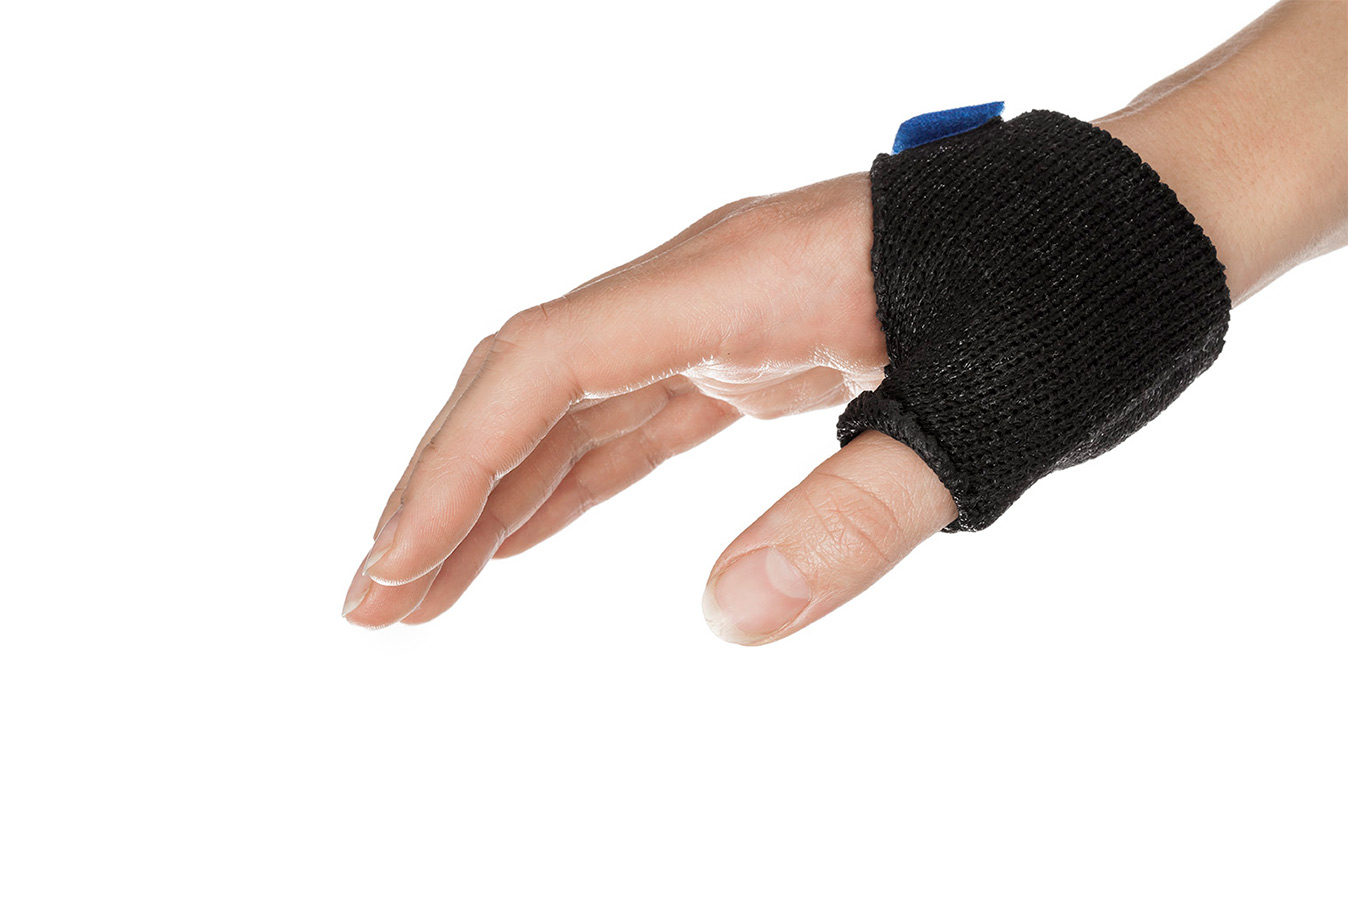 Hand with a thumb immobilization orthosis for arthritis in Orficast More Black